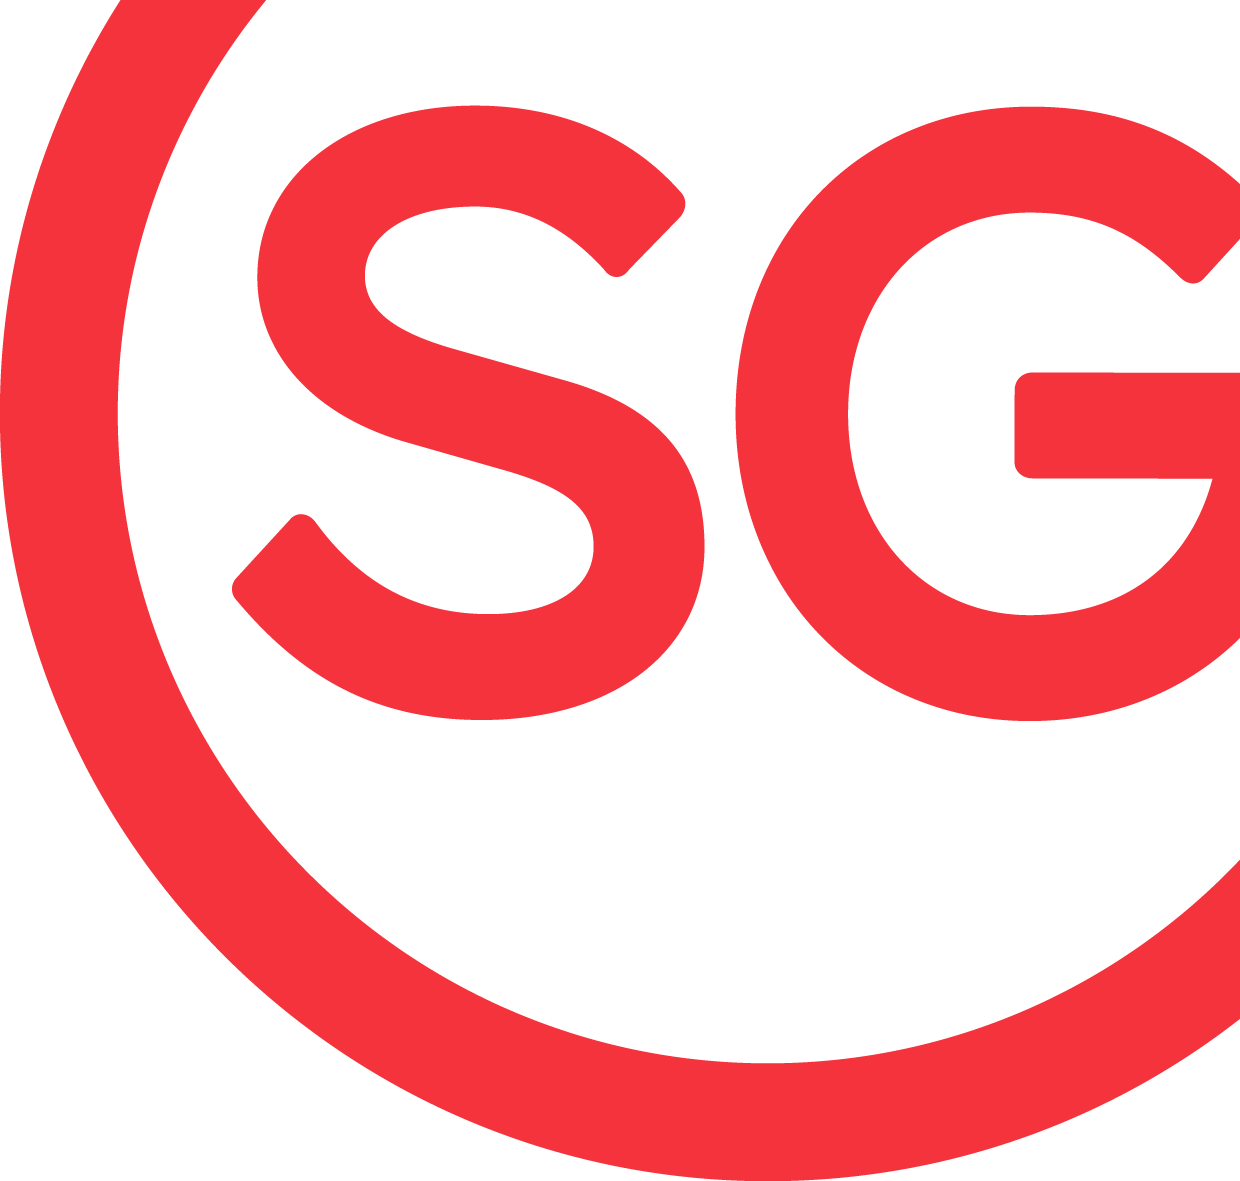 S G Logo - STB Owned